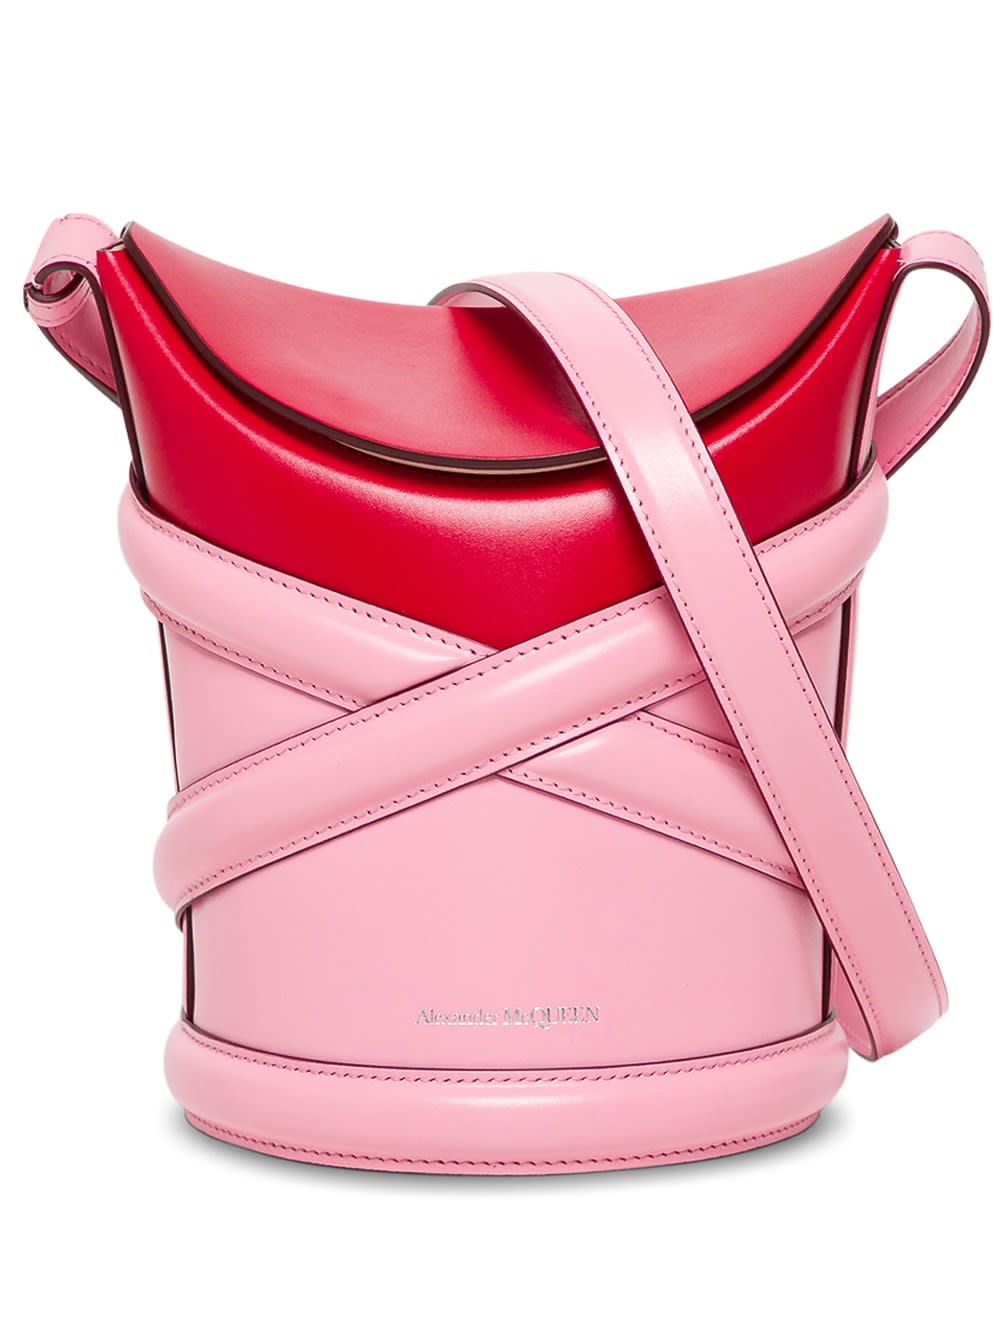 Alexander McQueen The Curve Crossbody Bag In Pink And Red Leather